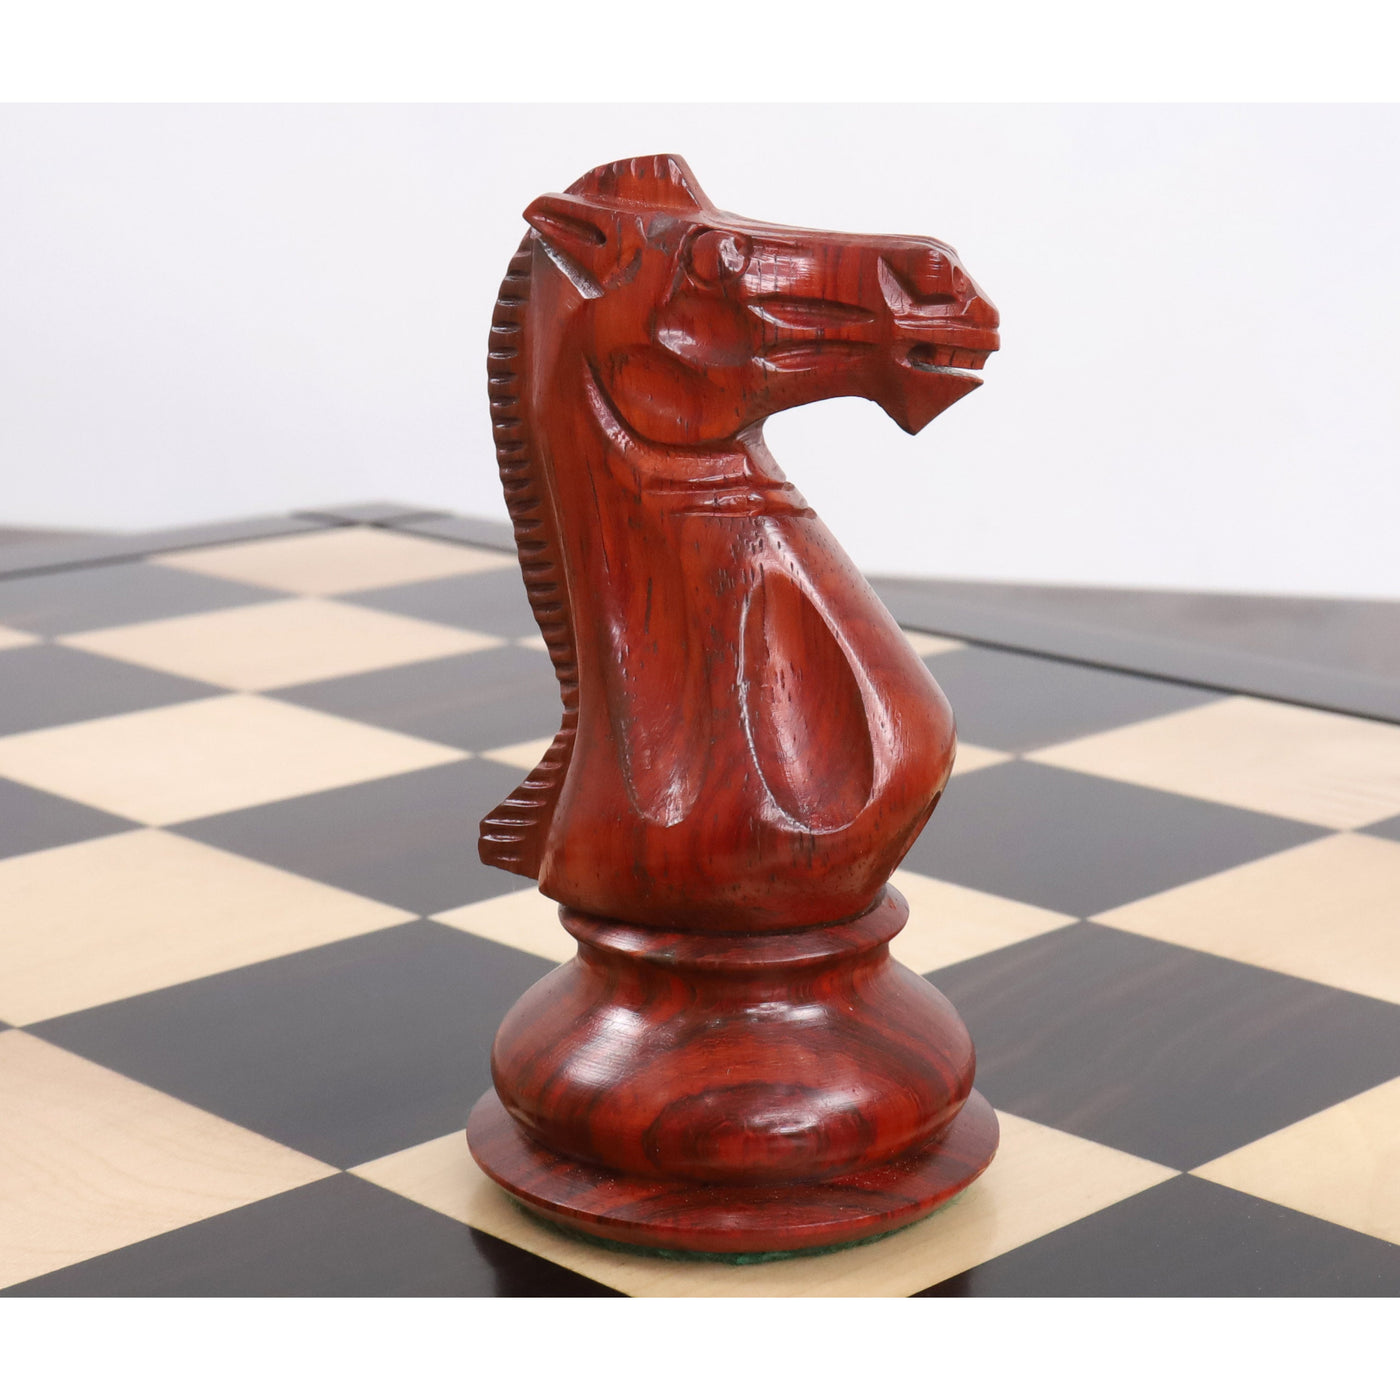 6.3" Jumbo Pro Staunton Luxury Chess Set - Chess Pieces Only -Bud Rosewood-Triple Weight